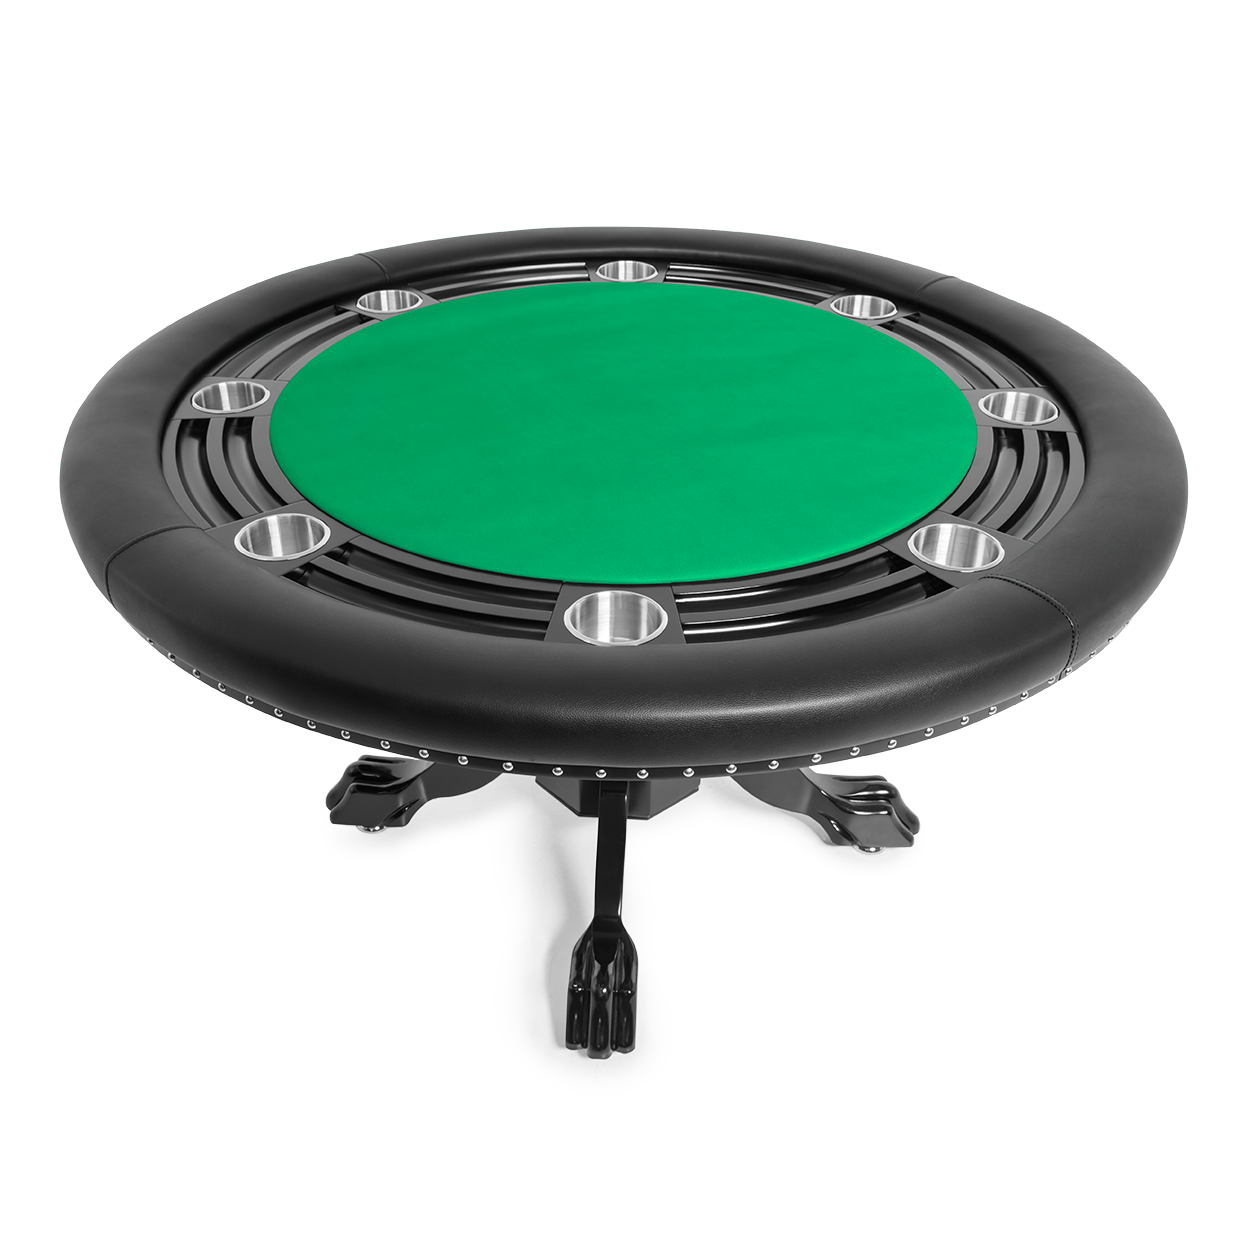 Round game table with oak ball and claw legs, and a green game top with a black finish.